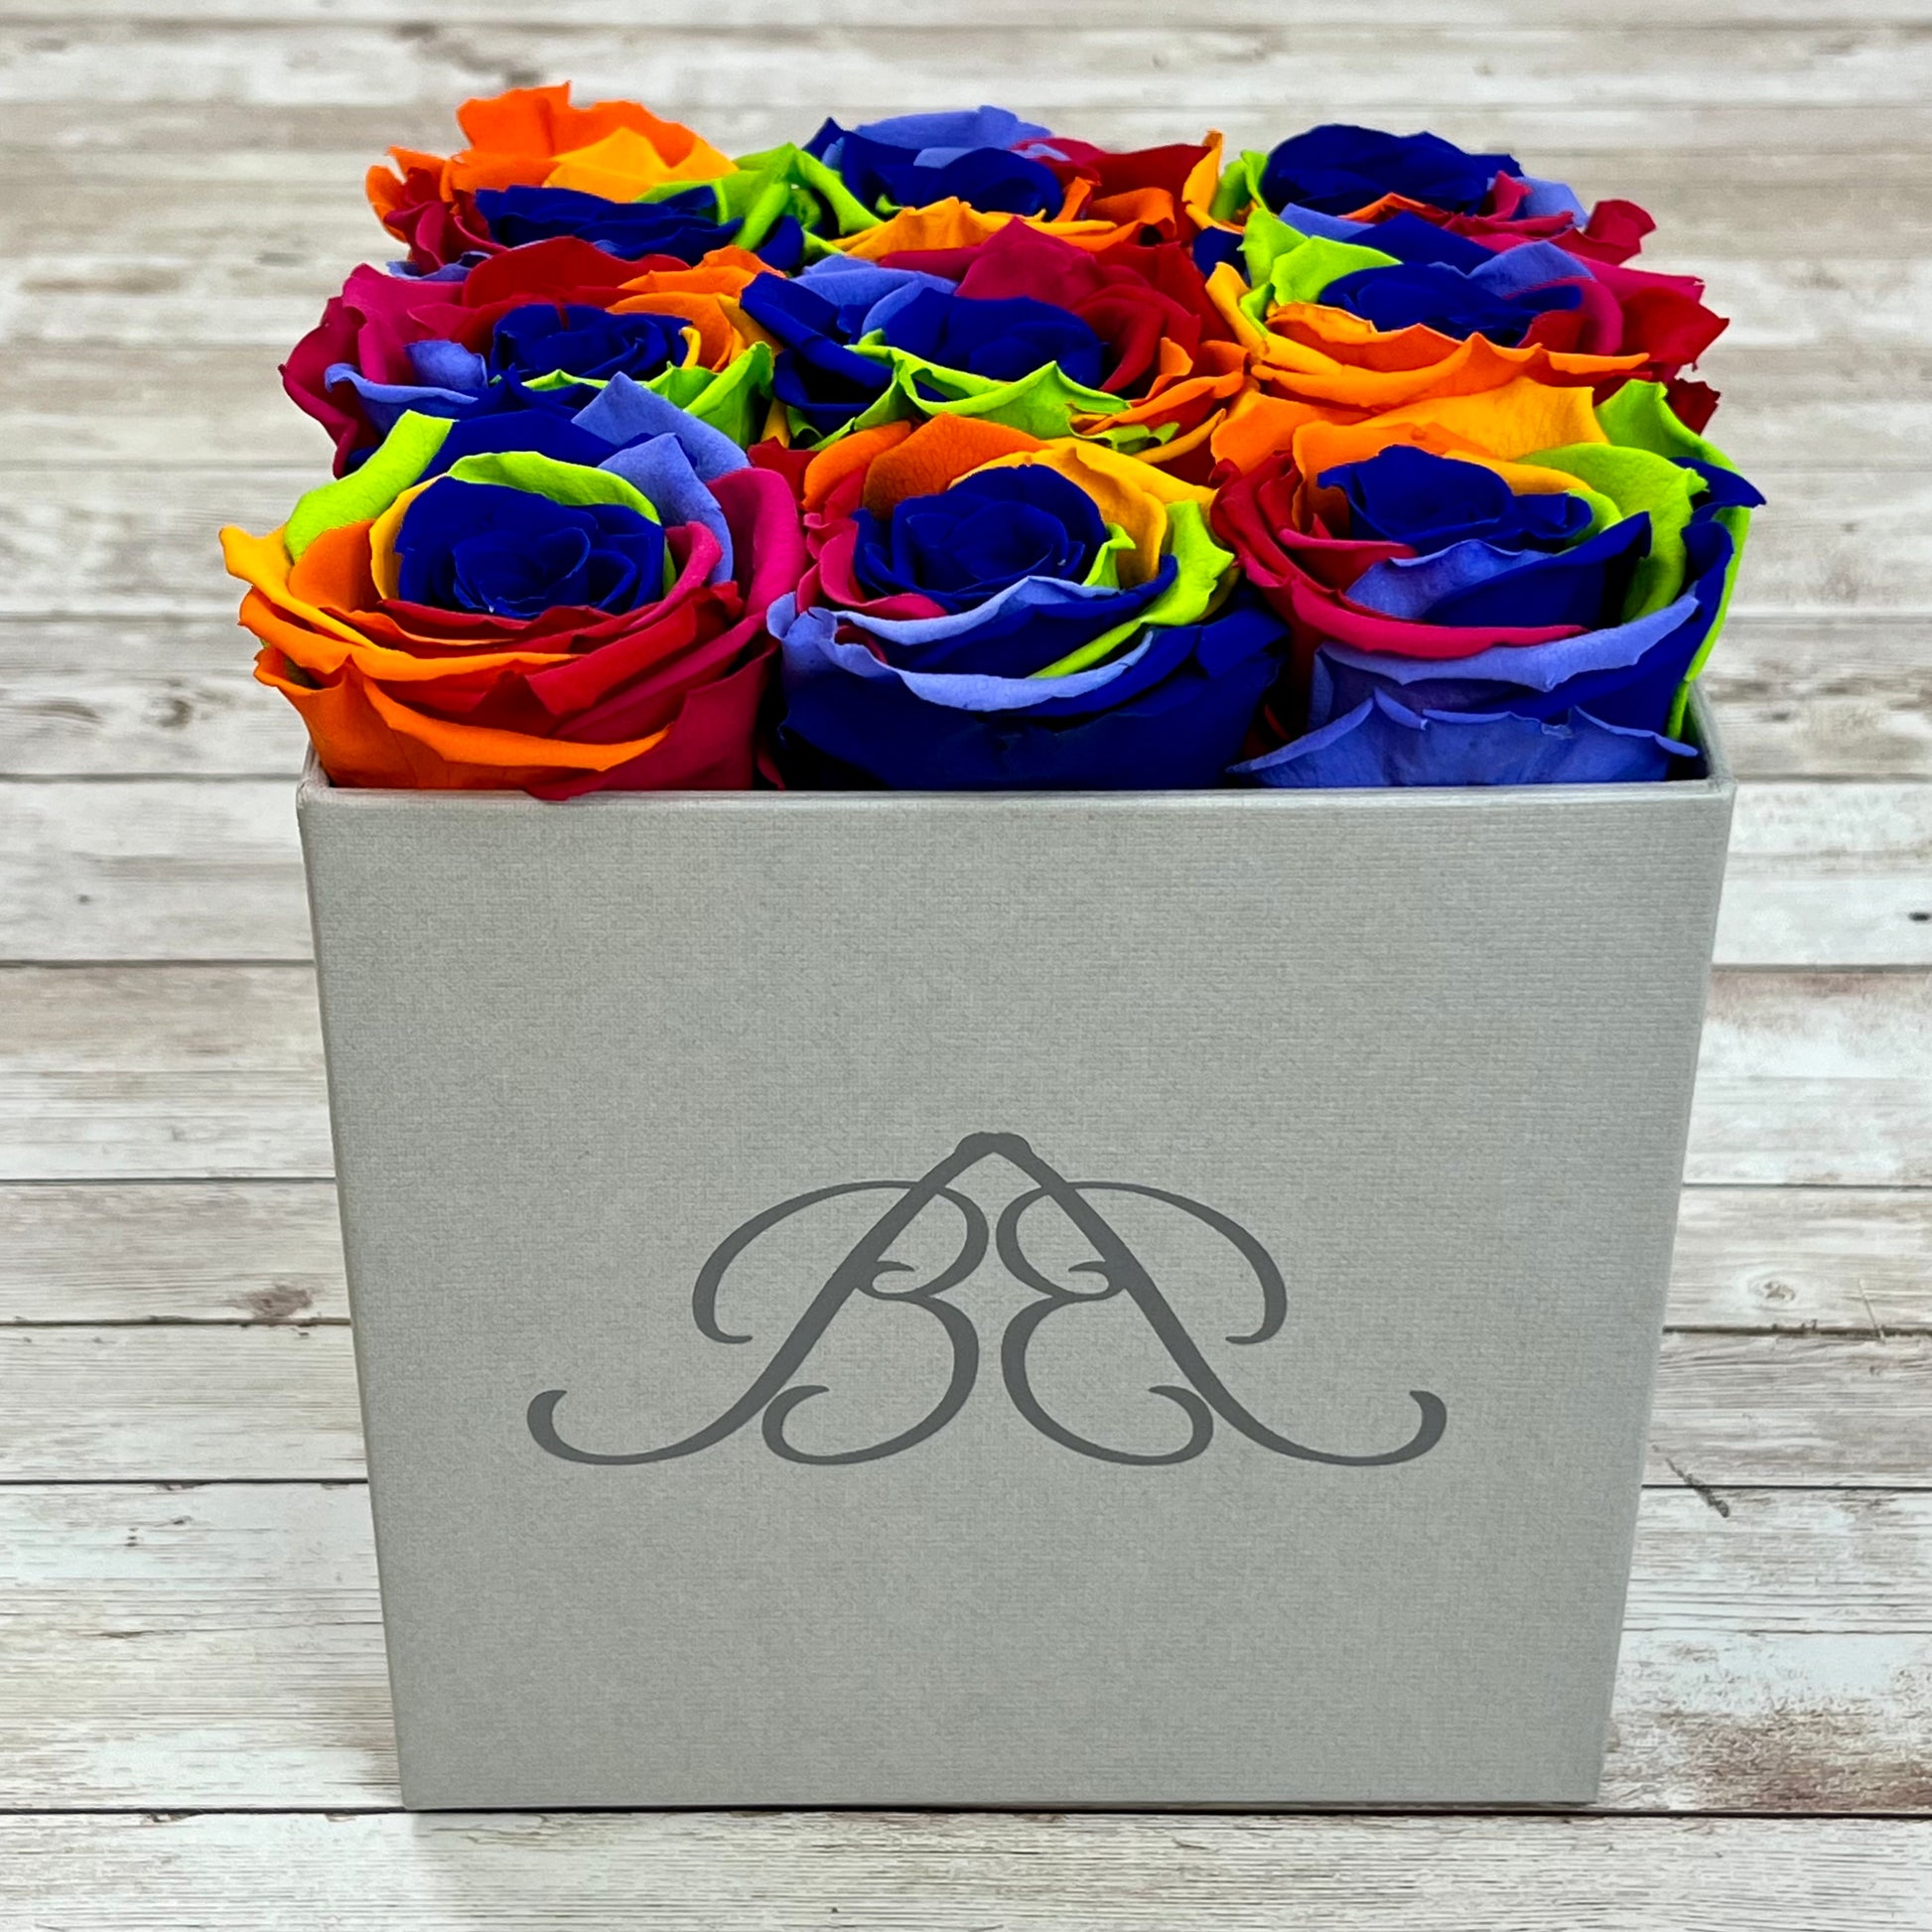 Grey square Infinity Rose Box - Infinity Roses - Rainbow One Year Roses - Square Box of Roses - Rose Colours divider-Carnival Rainbow